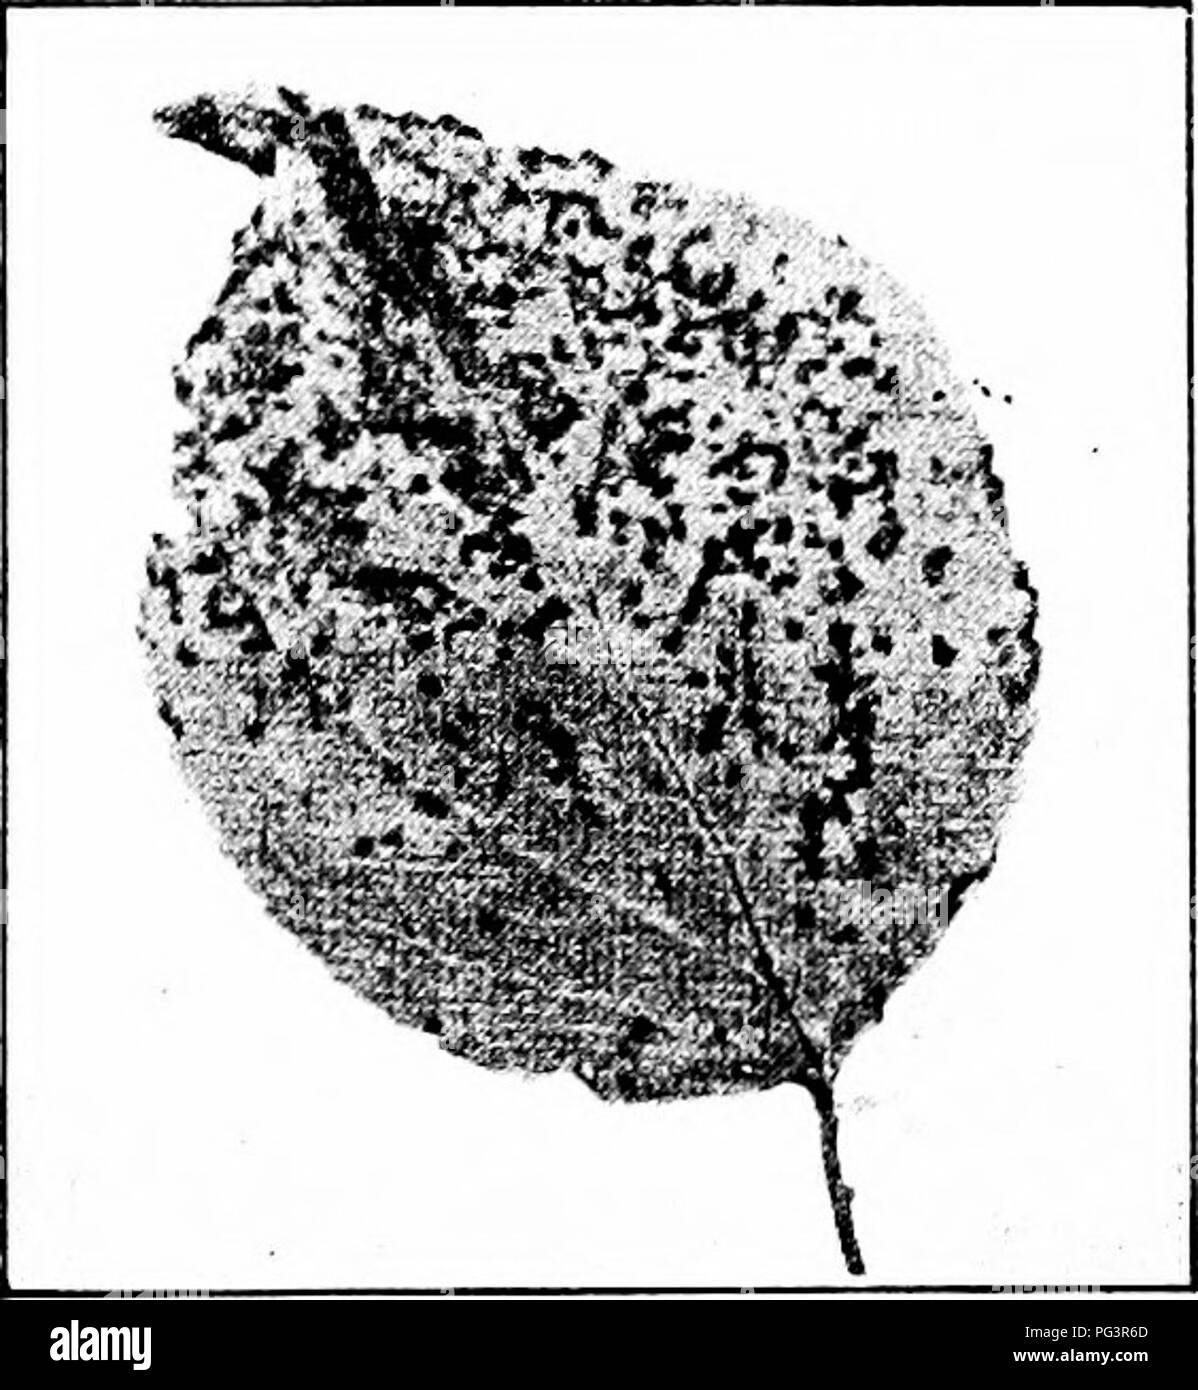 . Manual of fruit diseases . Fruit. 158 MANUAL OF FRUIT DISEASES attempt to distinguish the two die-back diseases. Where VaLsa leucostoma var. ruhesceiis is a factor, its pycnidia show as whitish dots over the surface of the lesion. (See in this connection Frost-Injury under Apple, page 35, and Die-Back under Peach, page 299.) Black-Spot Caused by Bacterium Pruni E. F. Smith As a rule, apricot fruits are less injured by black-spot than those of the other susceptible stone-fruits like the peach and plum. However, certain varieties of apricots are severely affected; the Royal, Sweet Russian, Pea Stock Photo